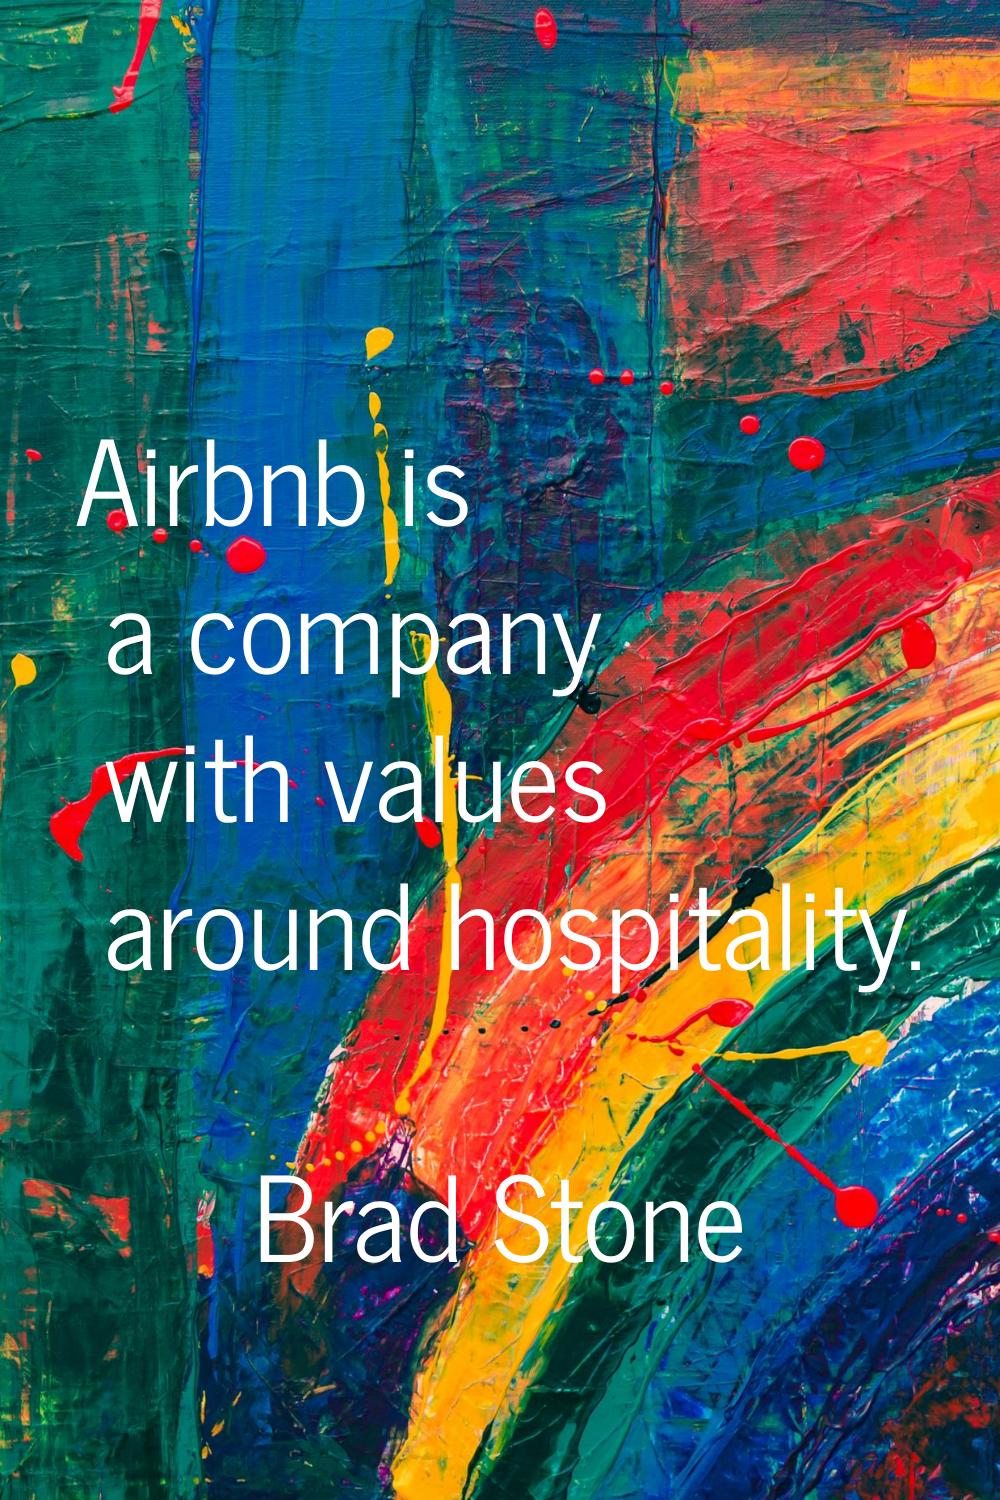 Airbnb is a company with values around hospitality.